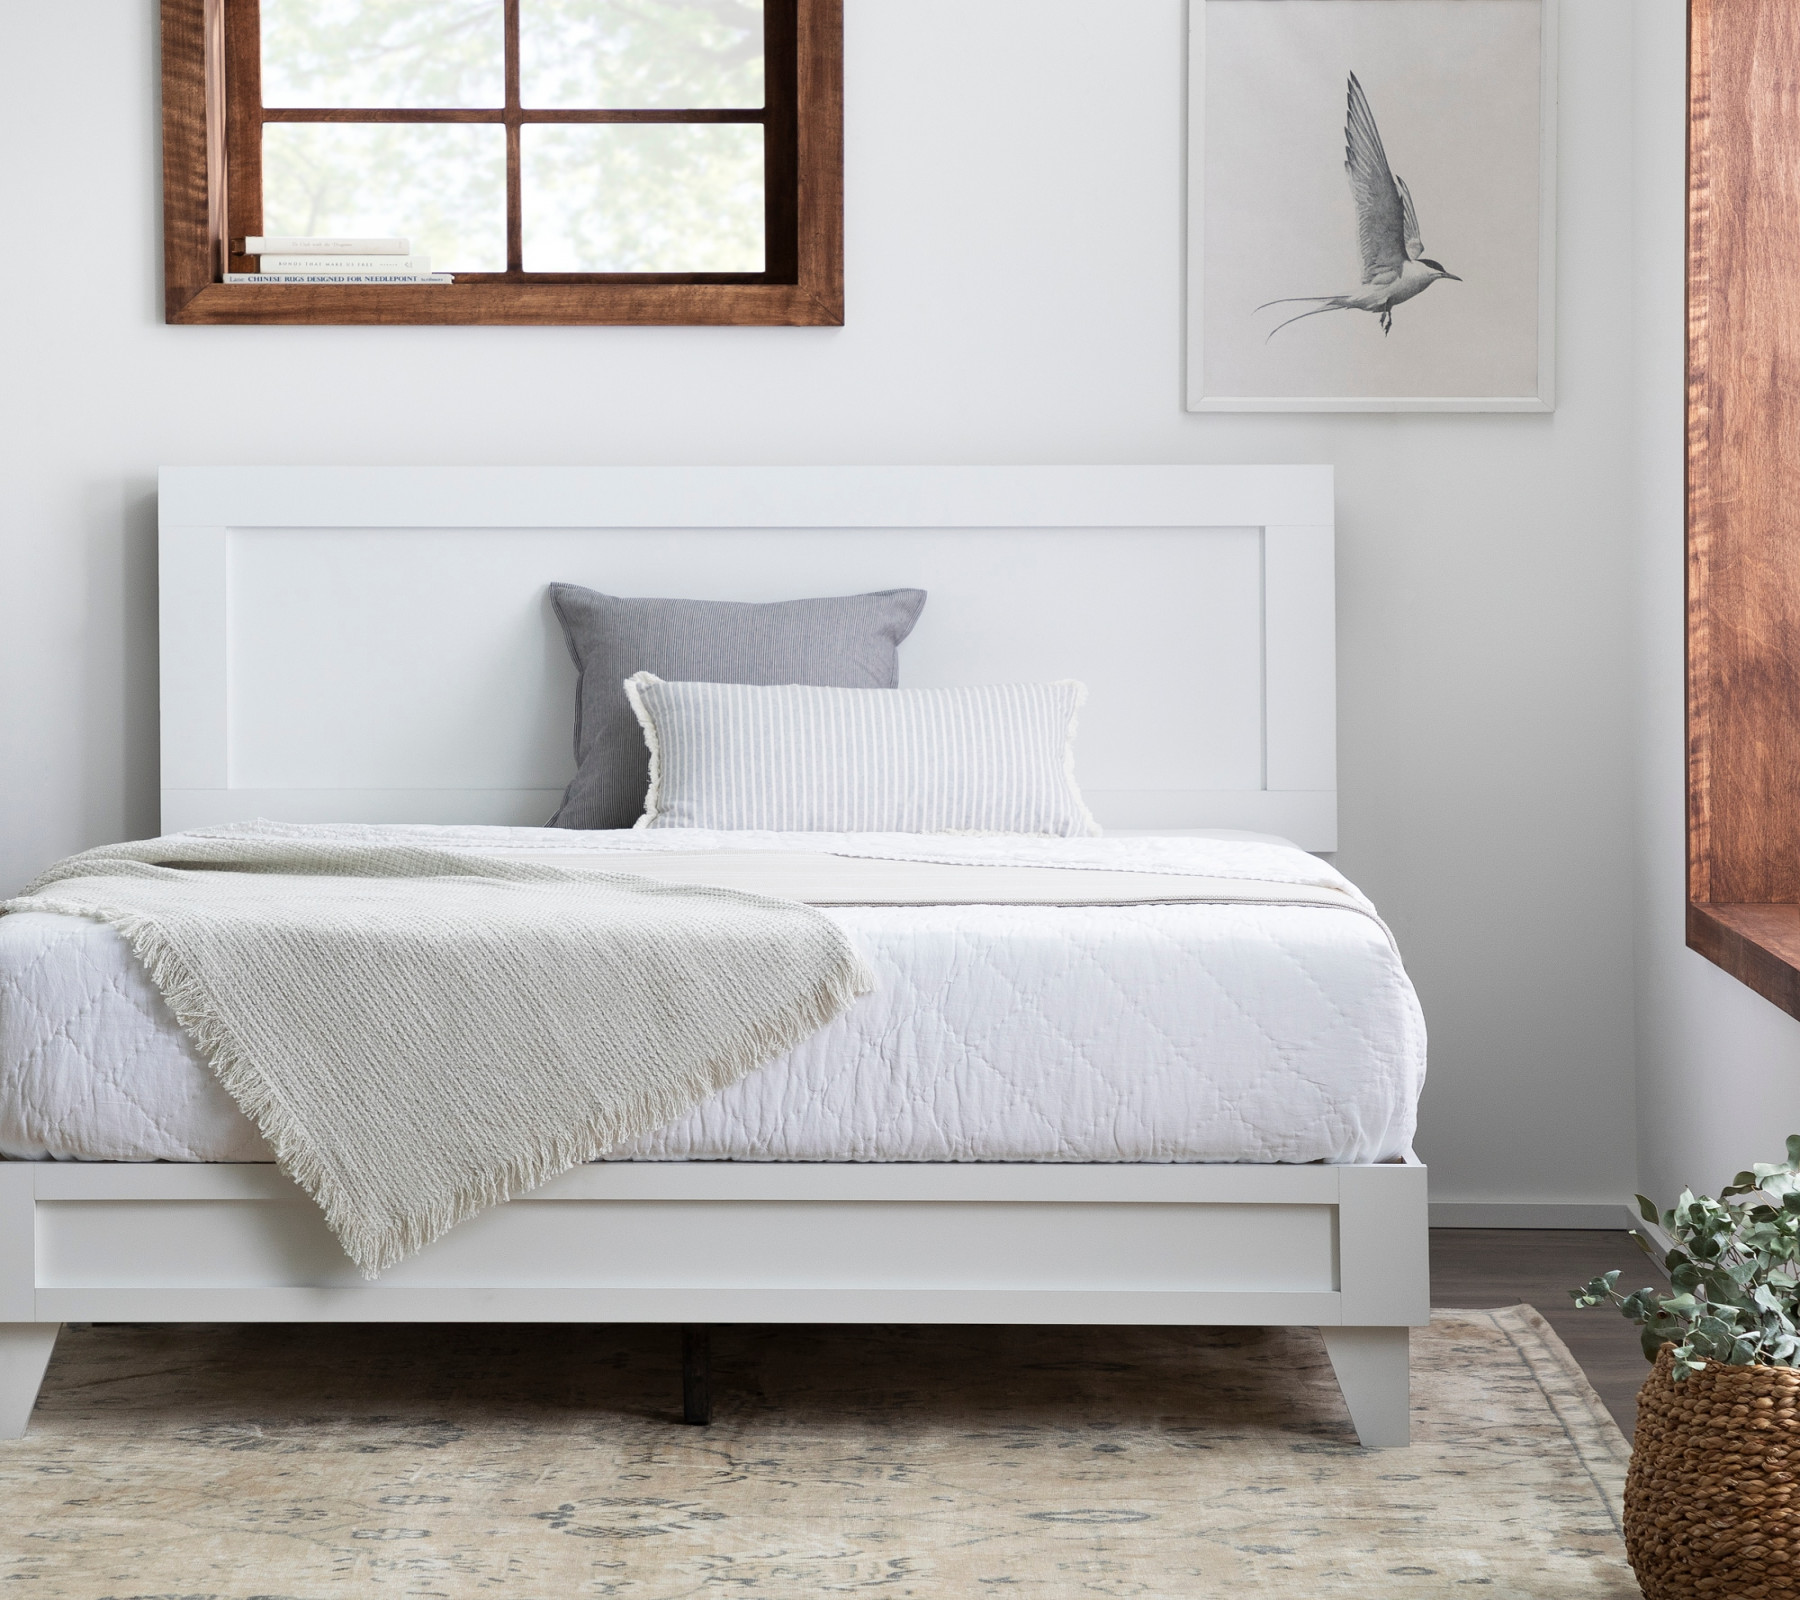 Brookside Leah Classic Wooden White Queen Platform Bed at Lowes